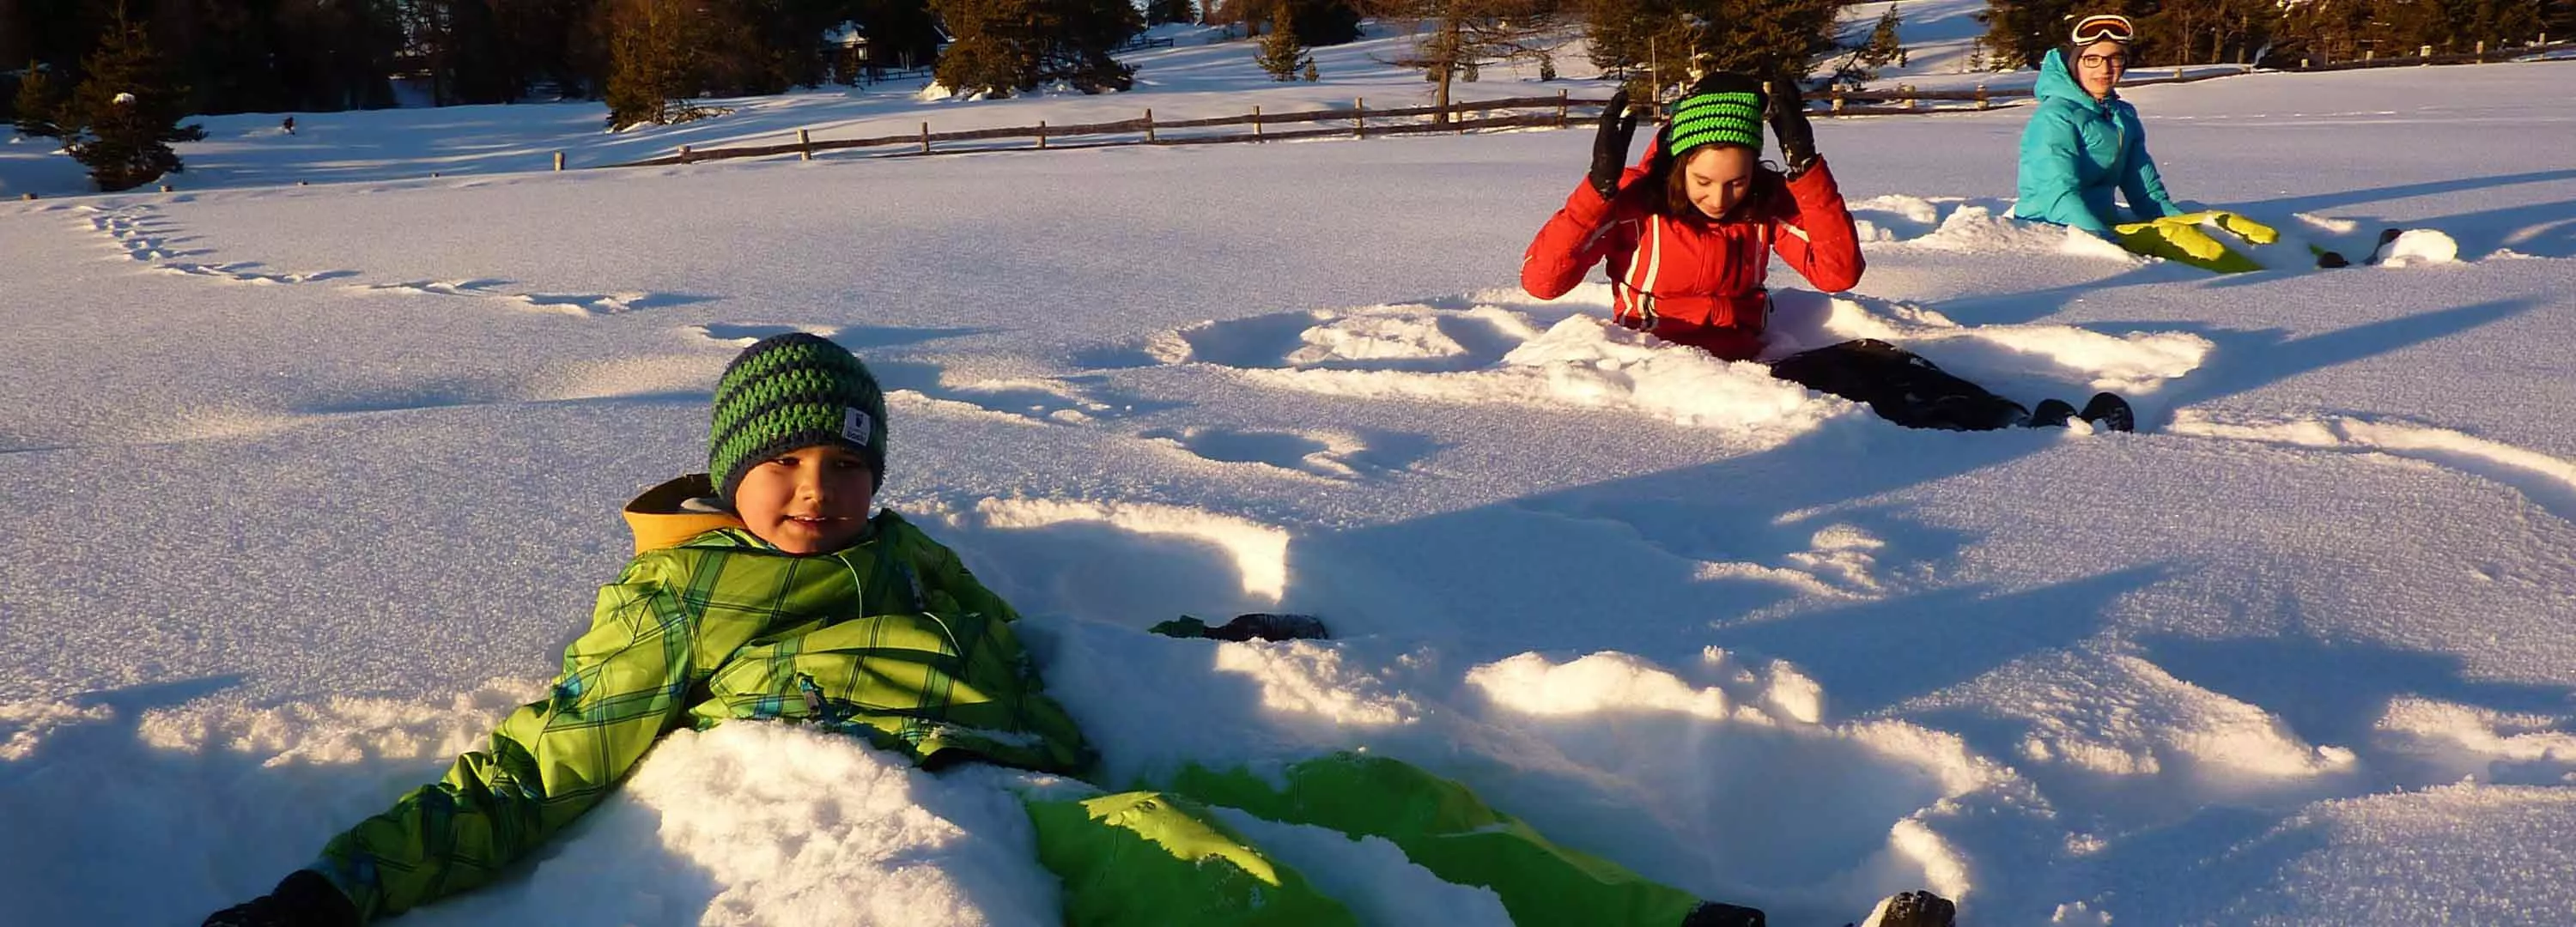 Plose in Italy, Europe | Sledding - Rated 4.3